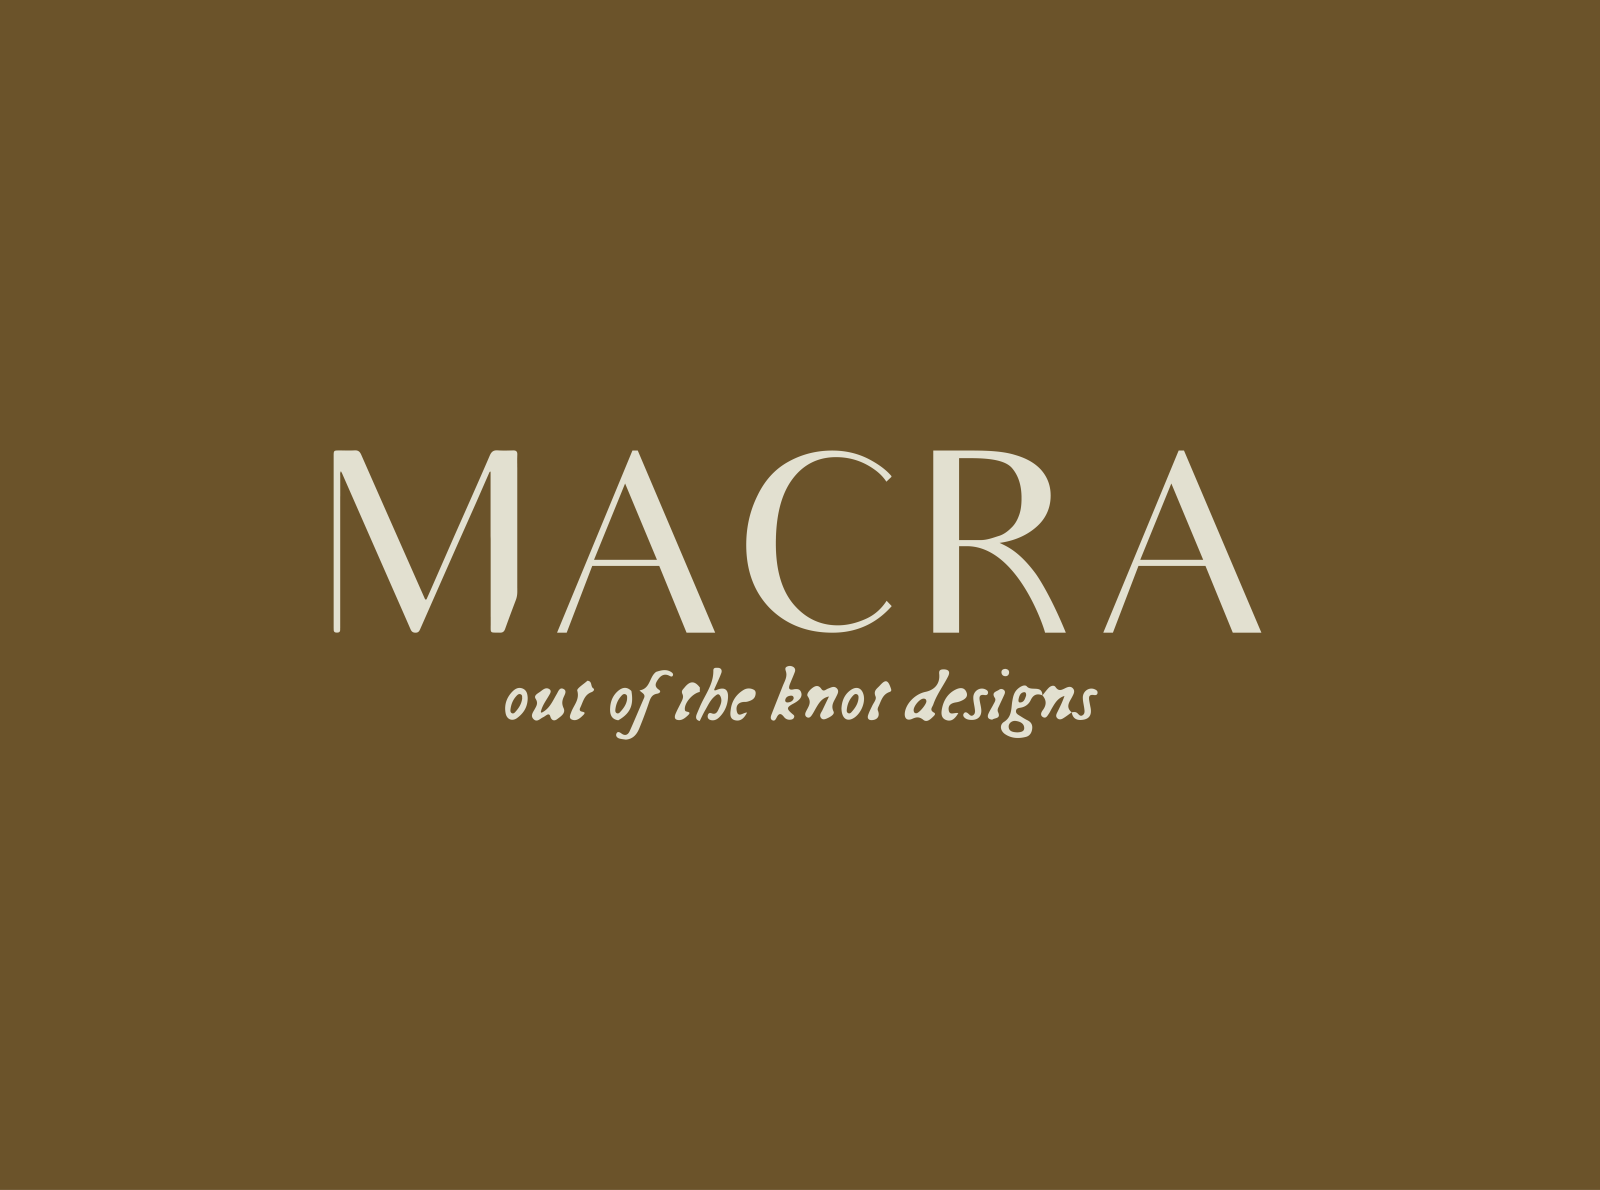 Macra Boutique Macrame Business by Abby Anderson on Dribbble